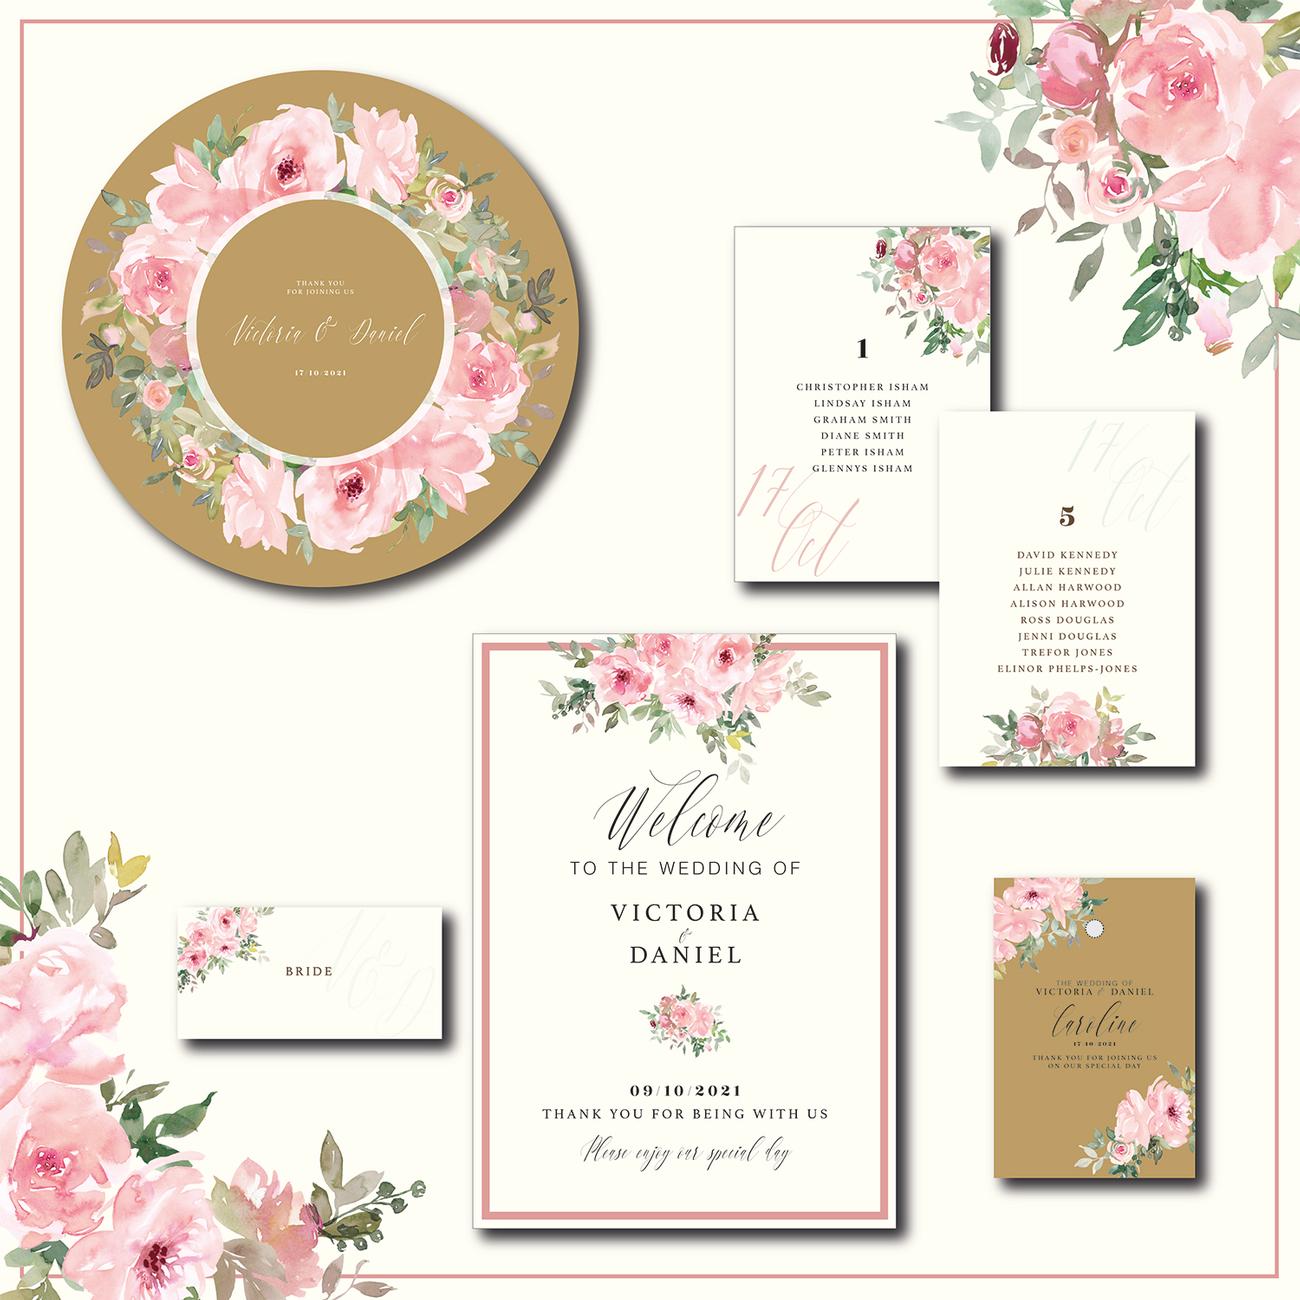 Afternoon Tea | Lincolnshire Garden Party Wedding Stationery gallery image 2